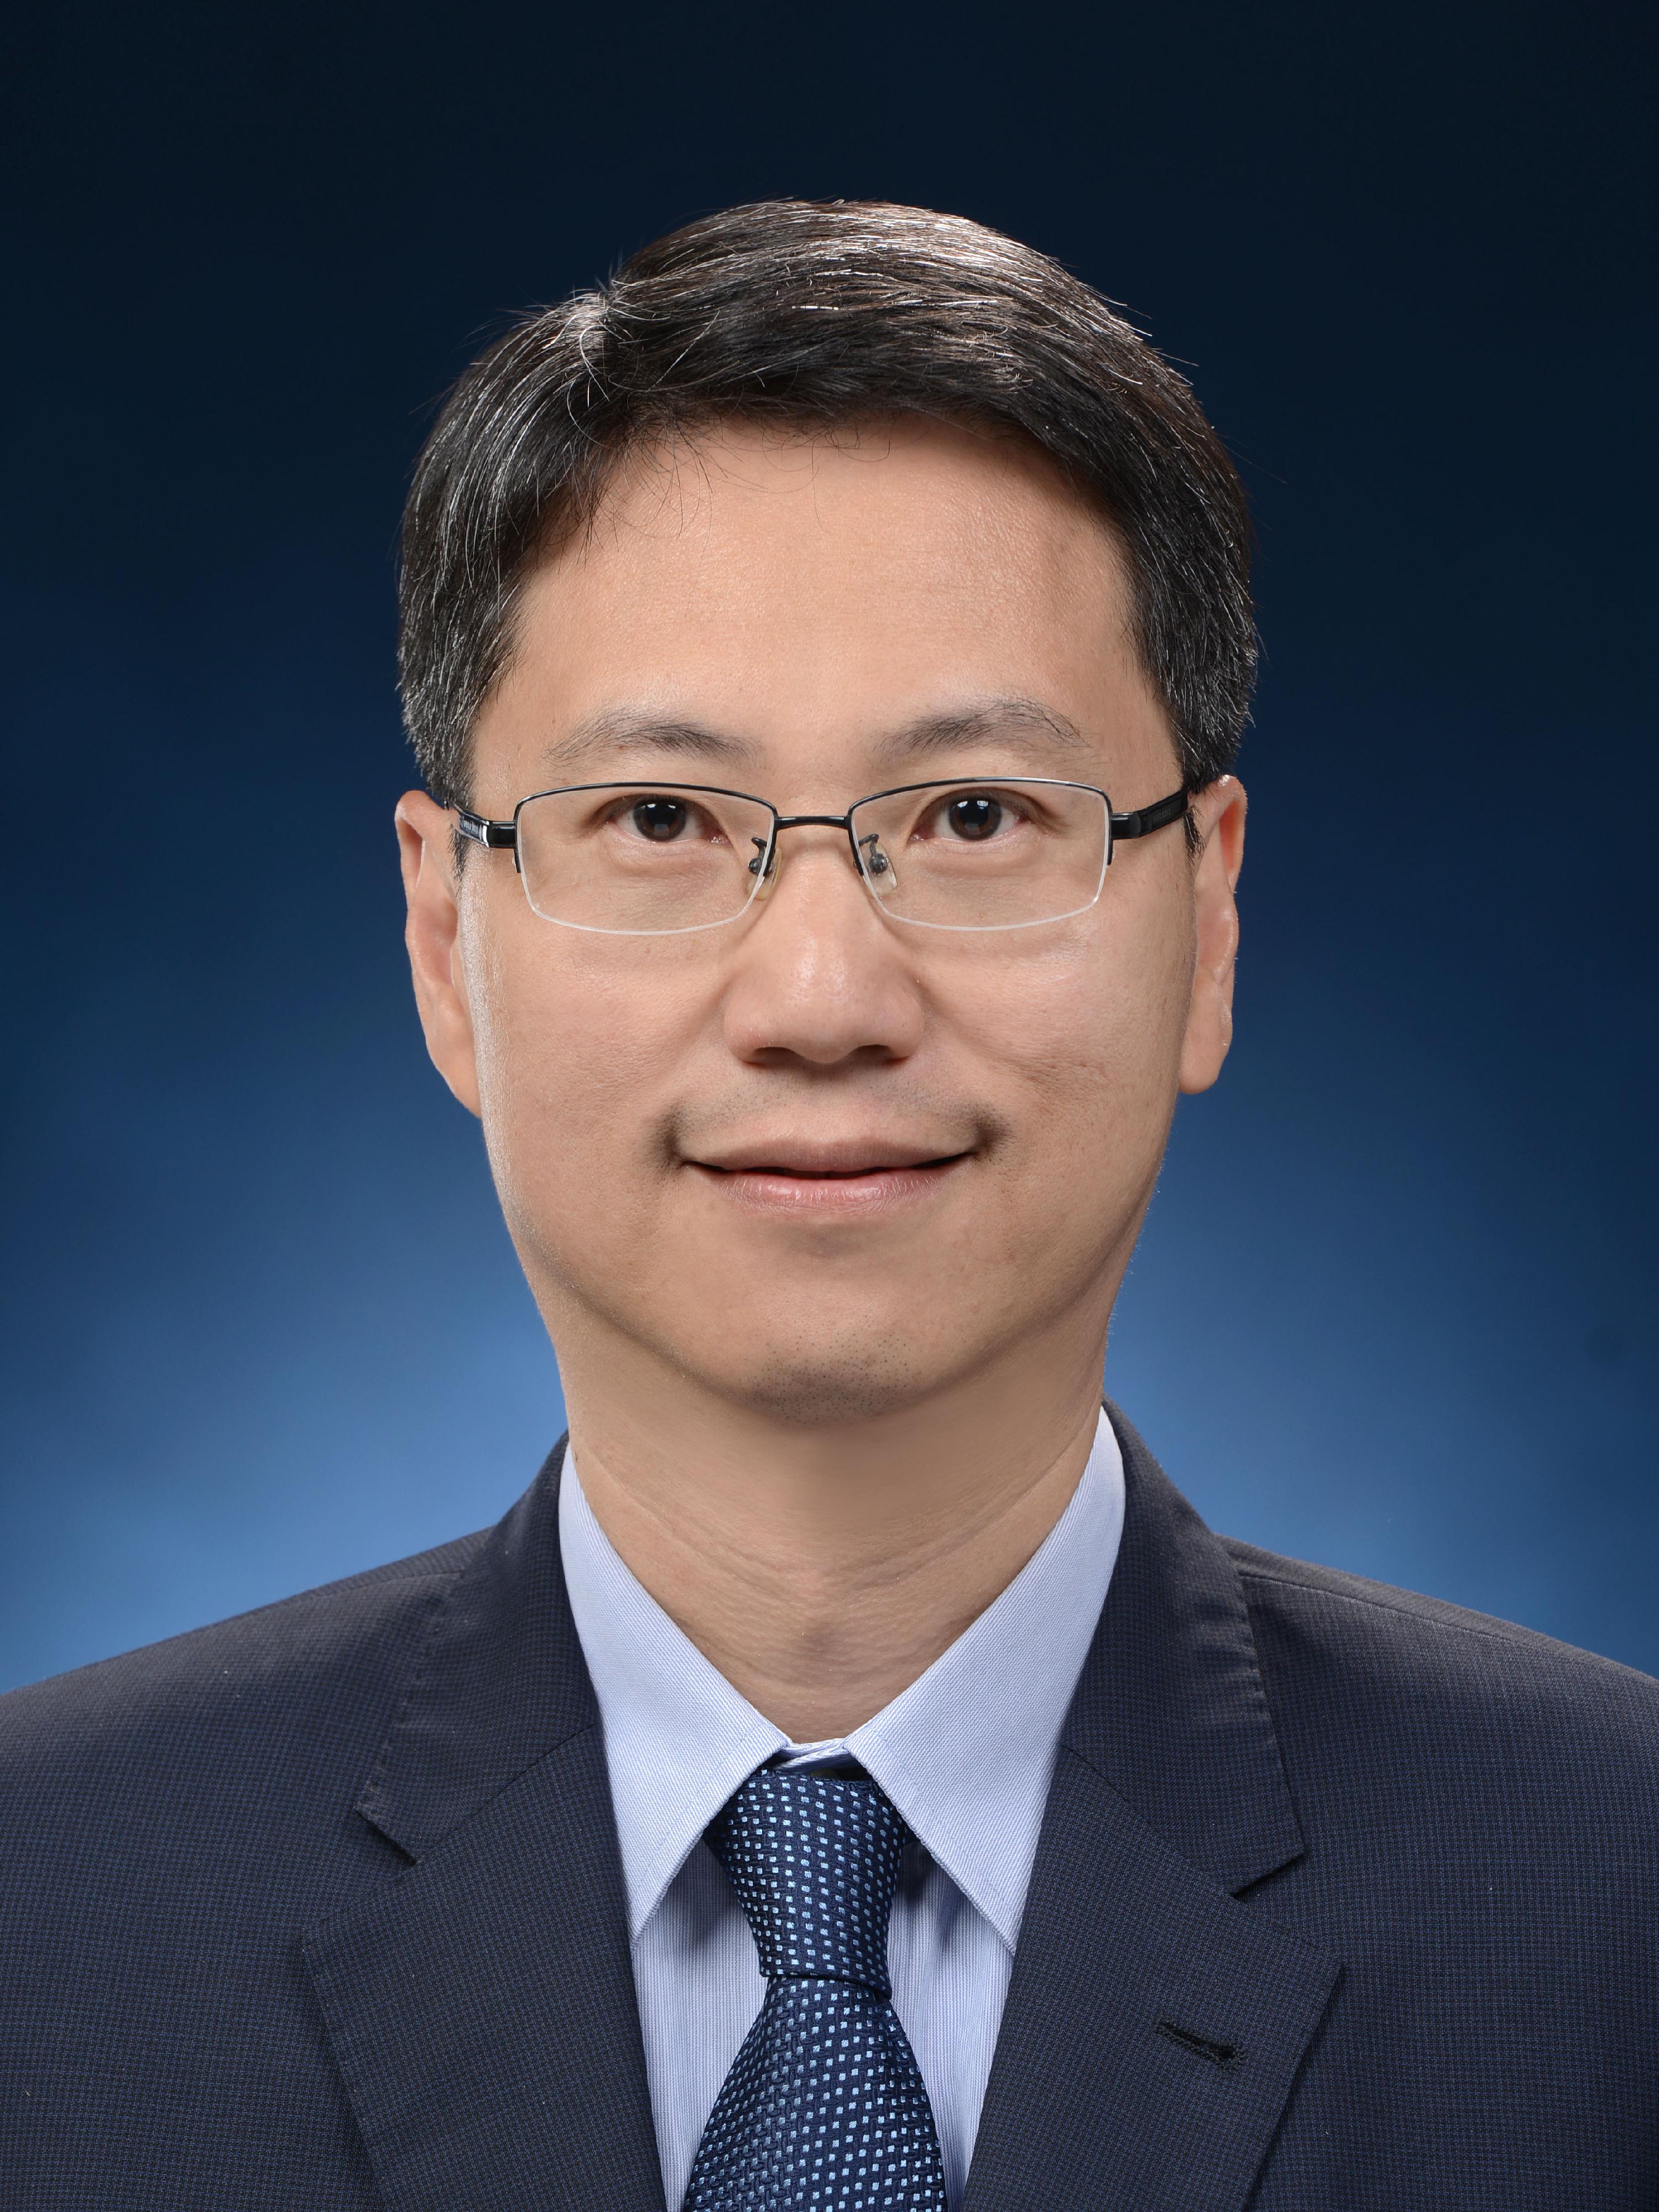 Mr Eddie Mak Tak-wai, Director, Celebrations Coordination Office, will assume the post of Permanent Secretary for Innovation, Technology and Industry on July 20, 2022.